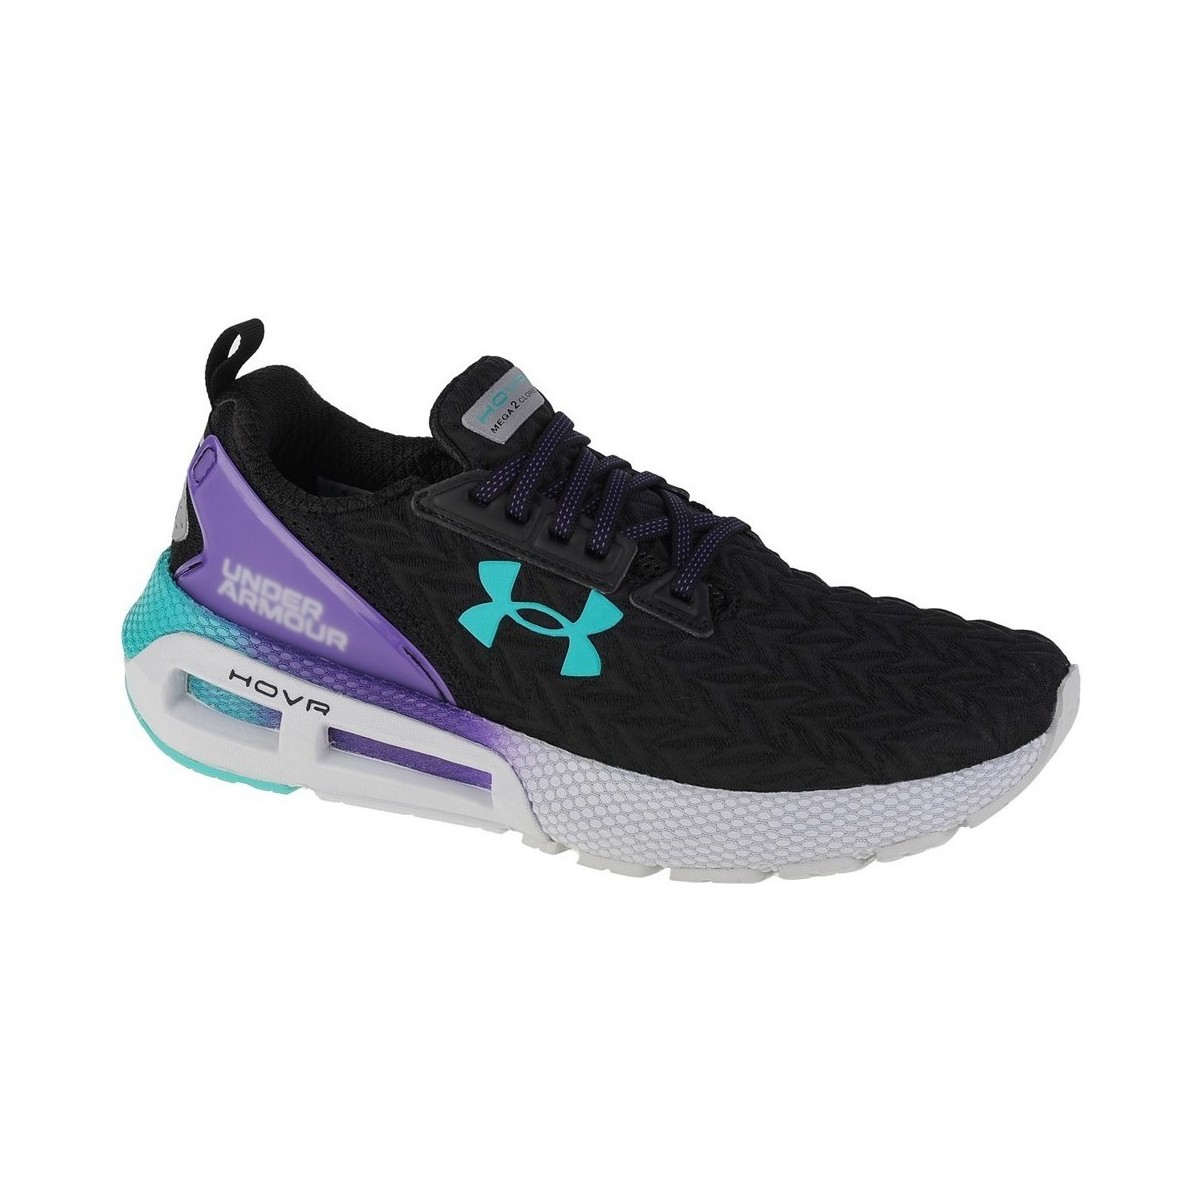 Shoes Men Running shoes Under Armour Hovr Mega 2 Clone Black